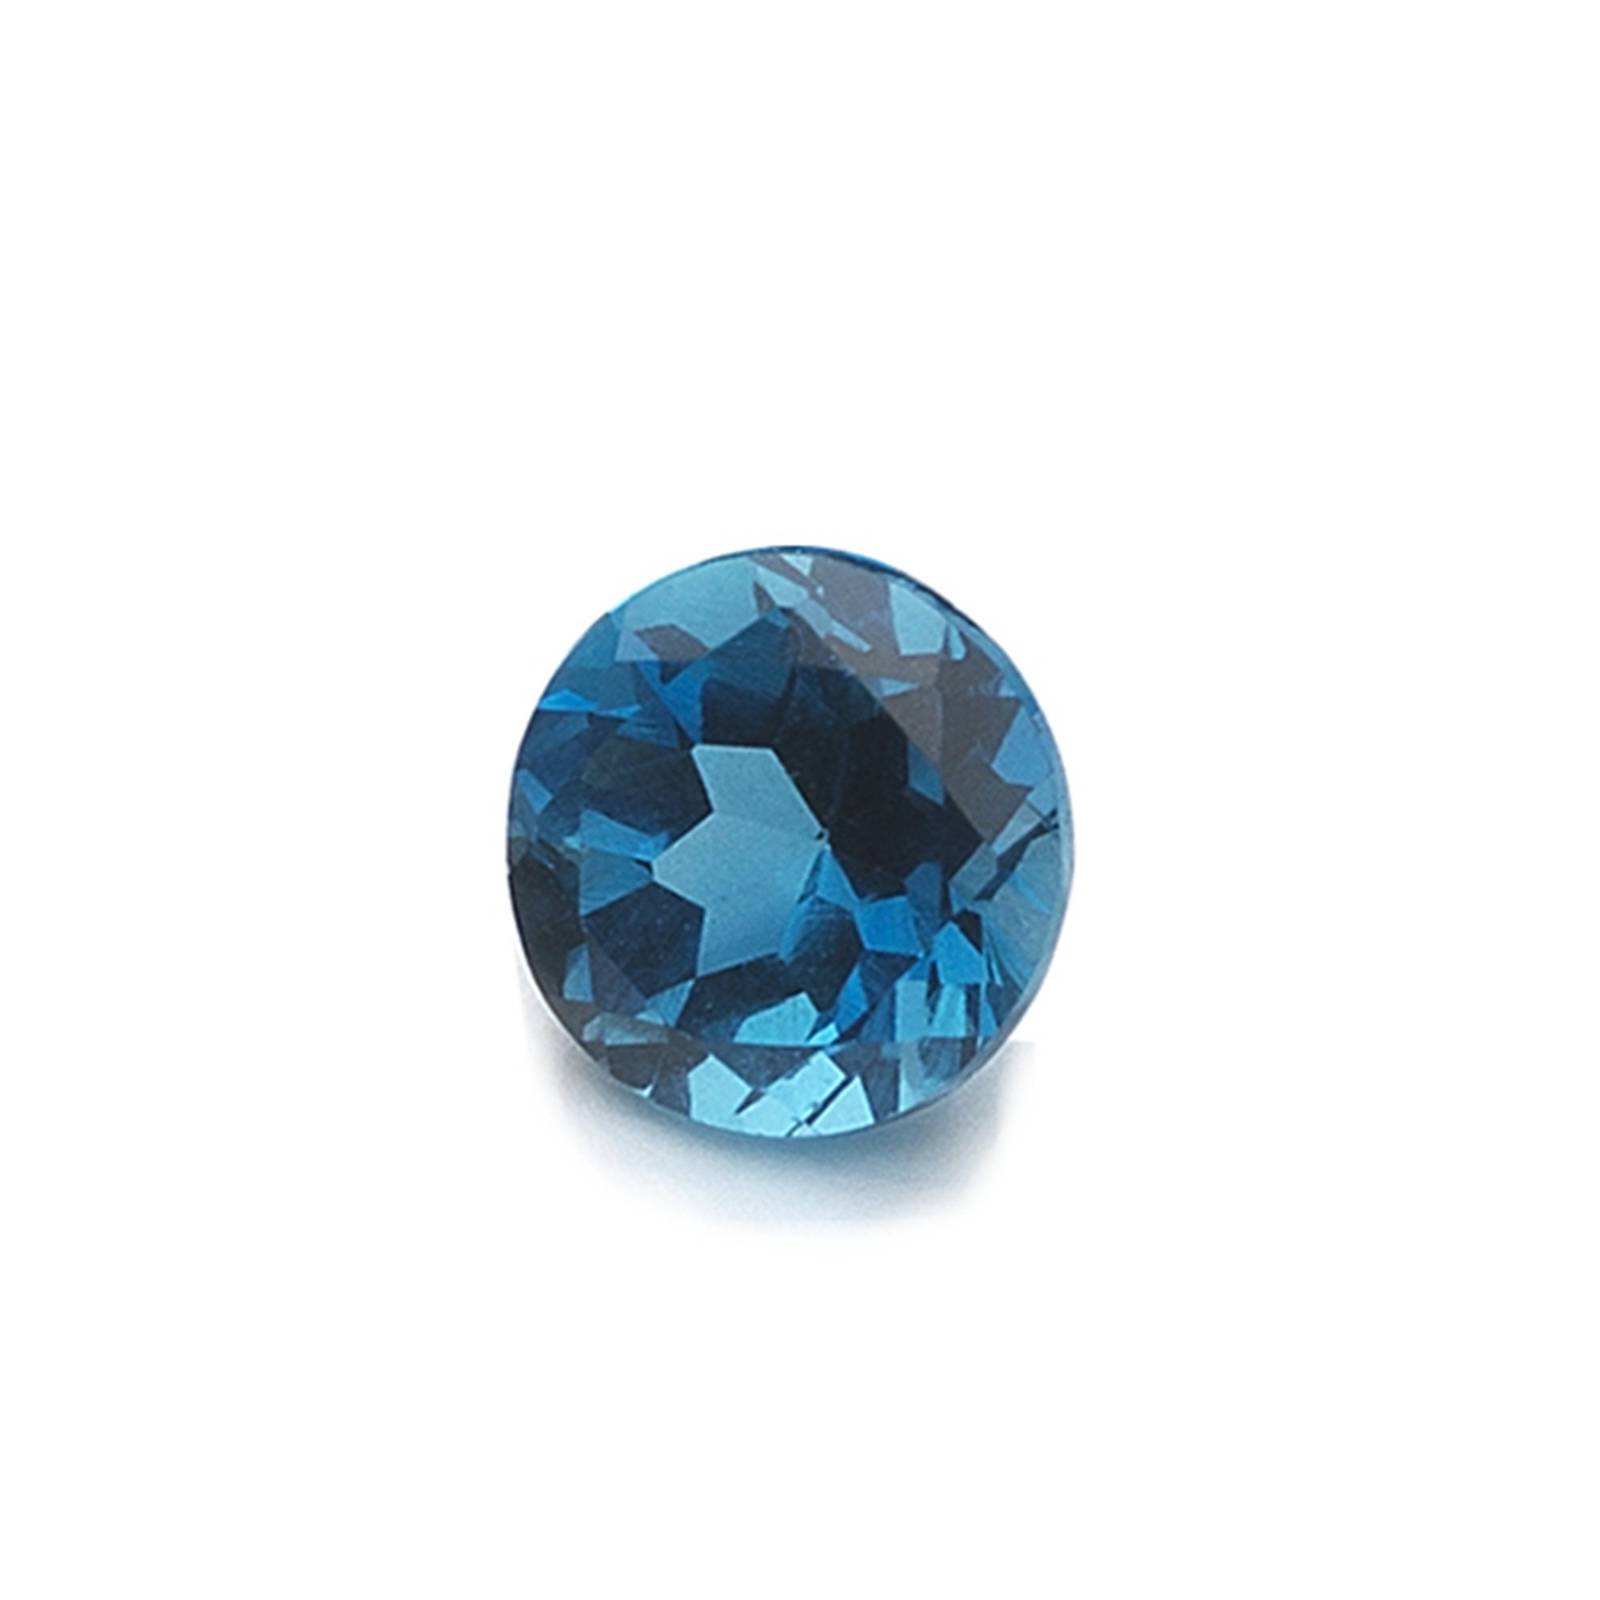 Primary image for Natural Round Shape London Blue Topaz AAA Quality Loose Gemstone Available from 